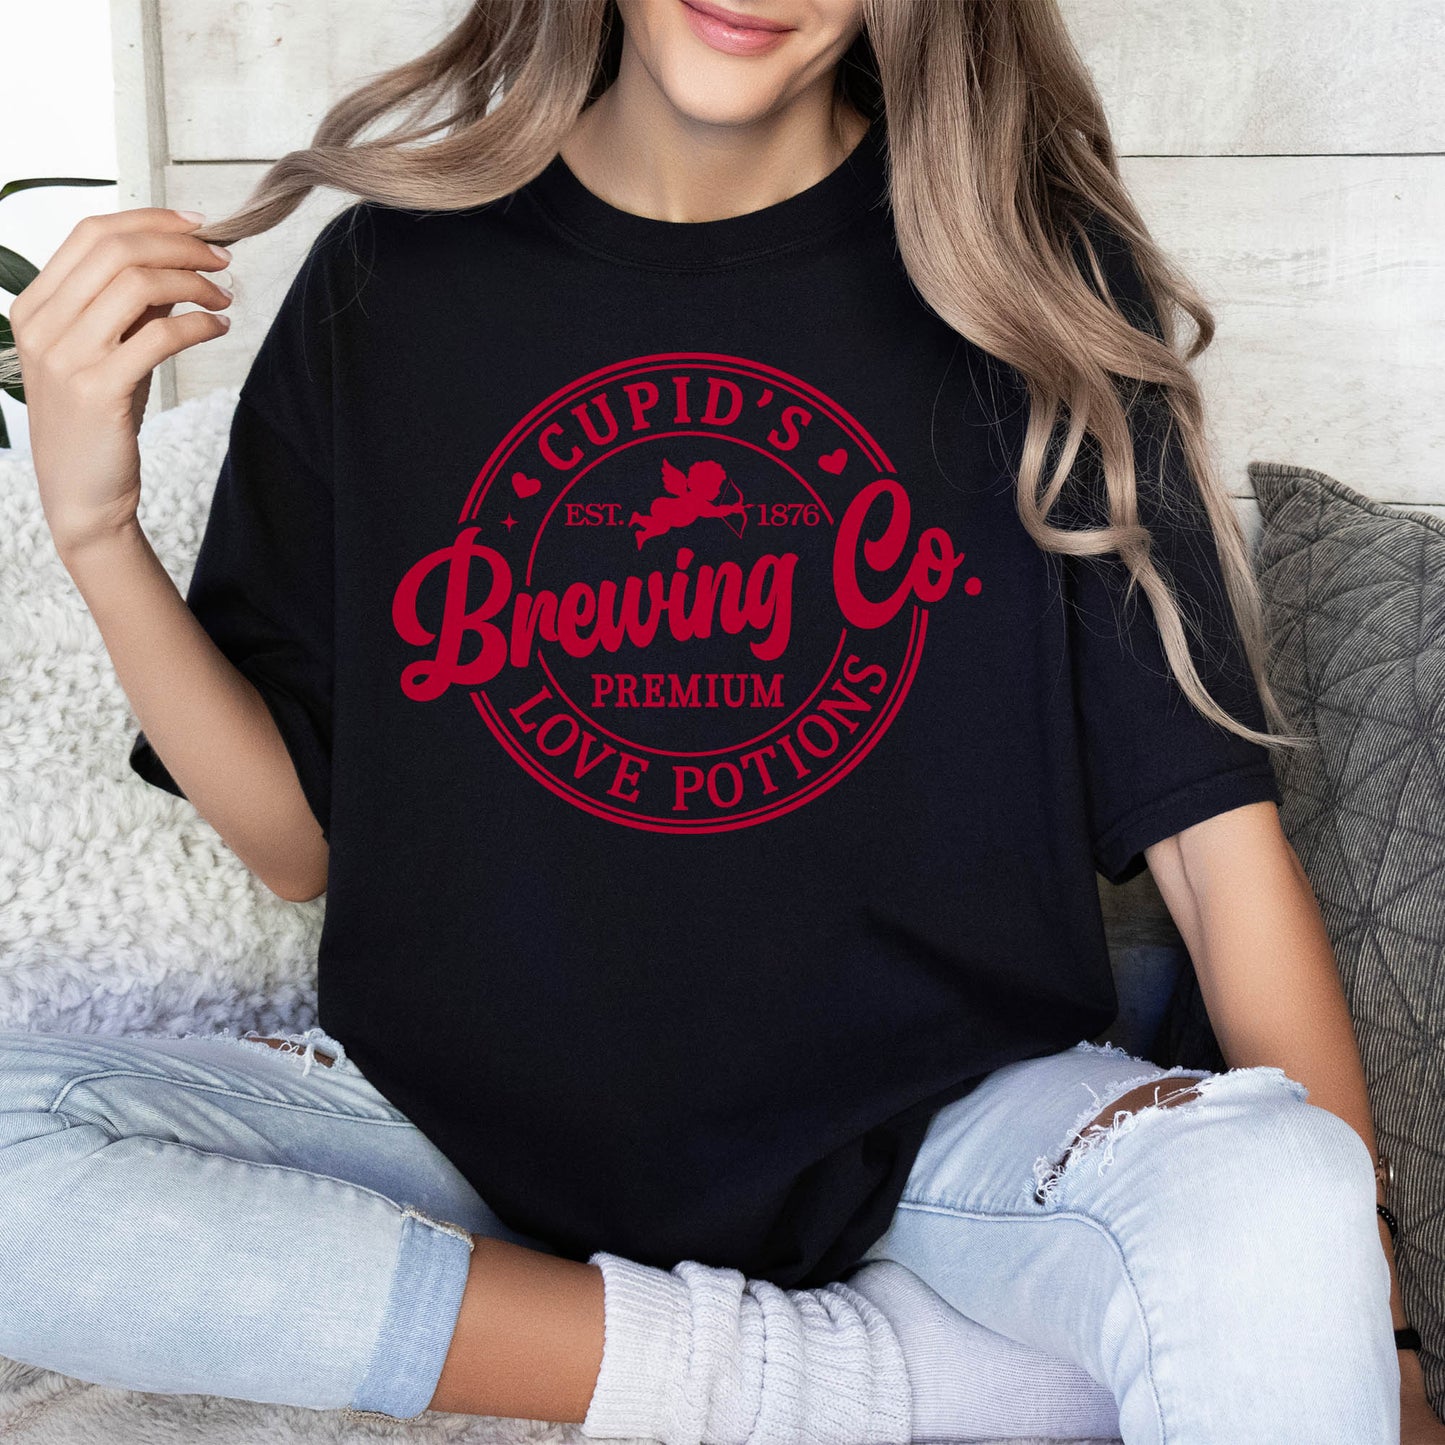 Cupid's Brewing Valentine's Day Shirt